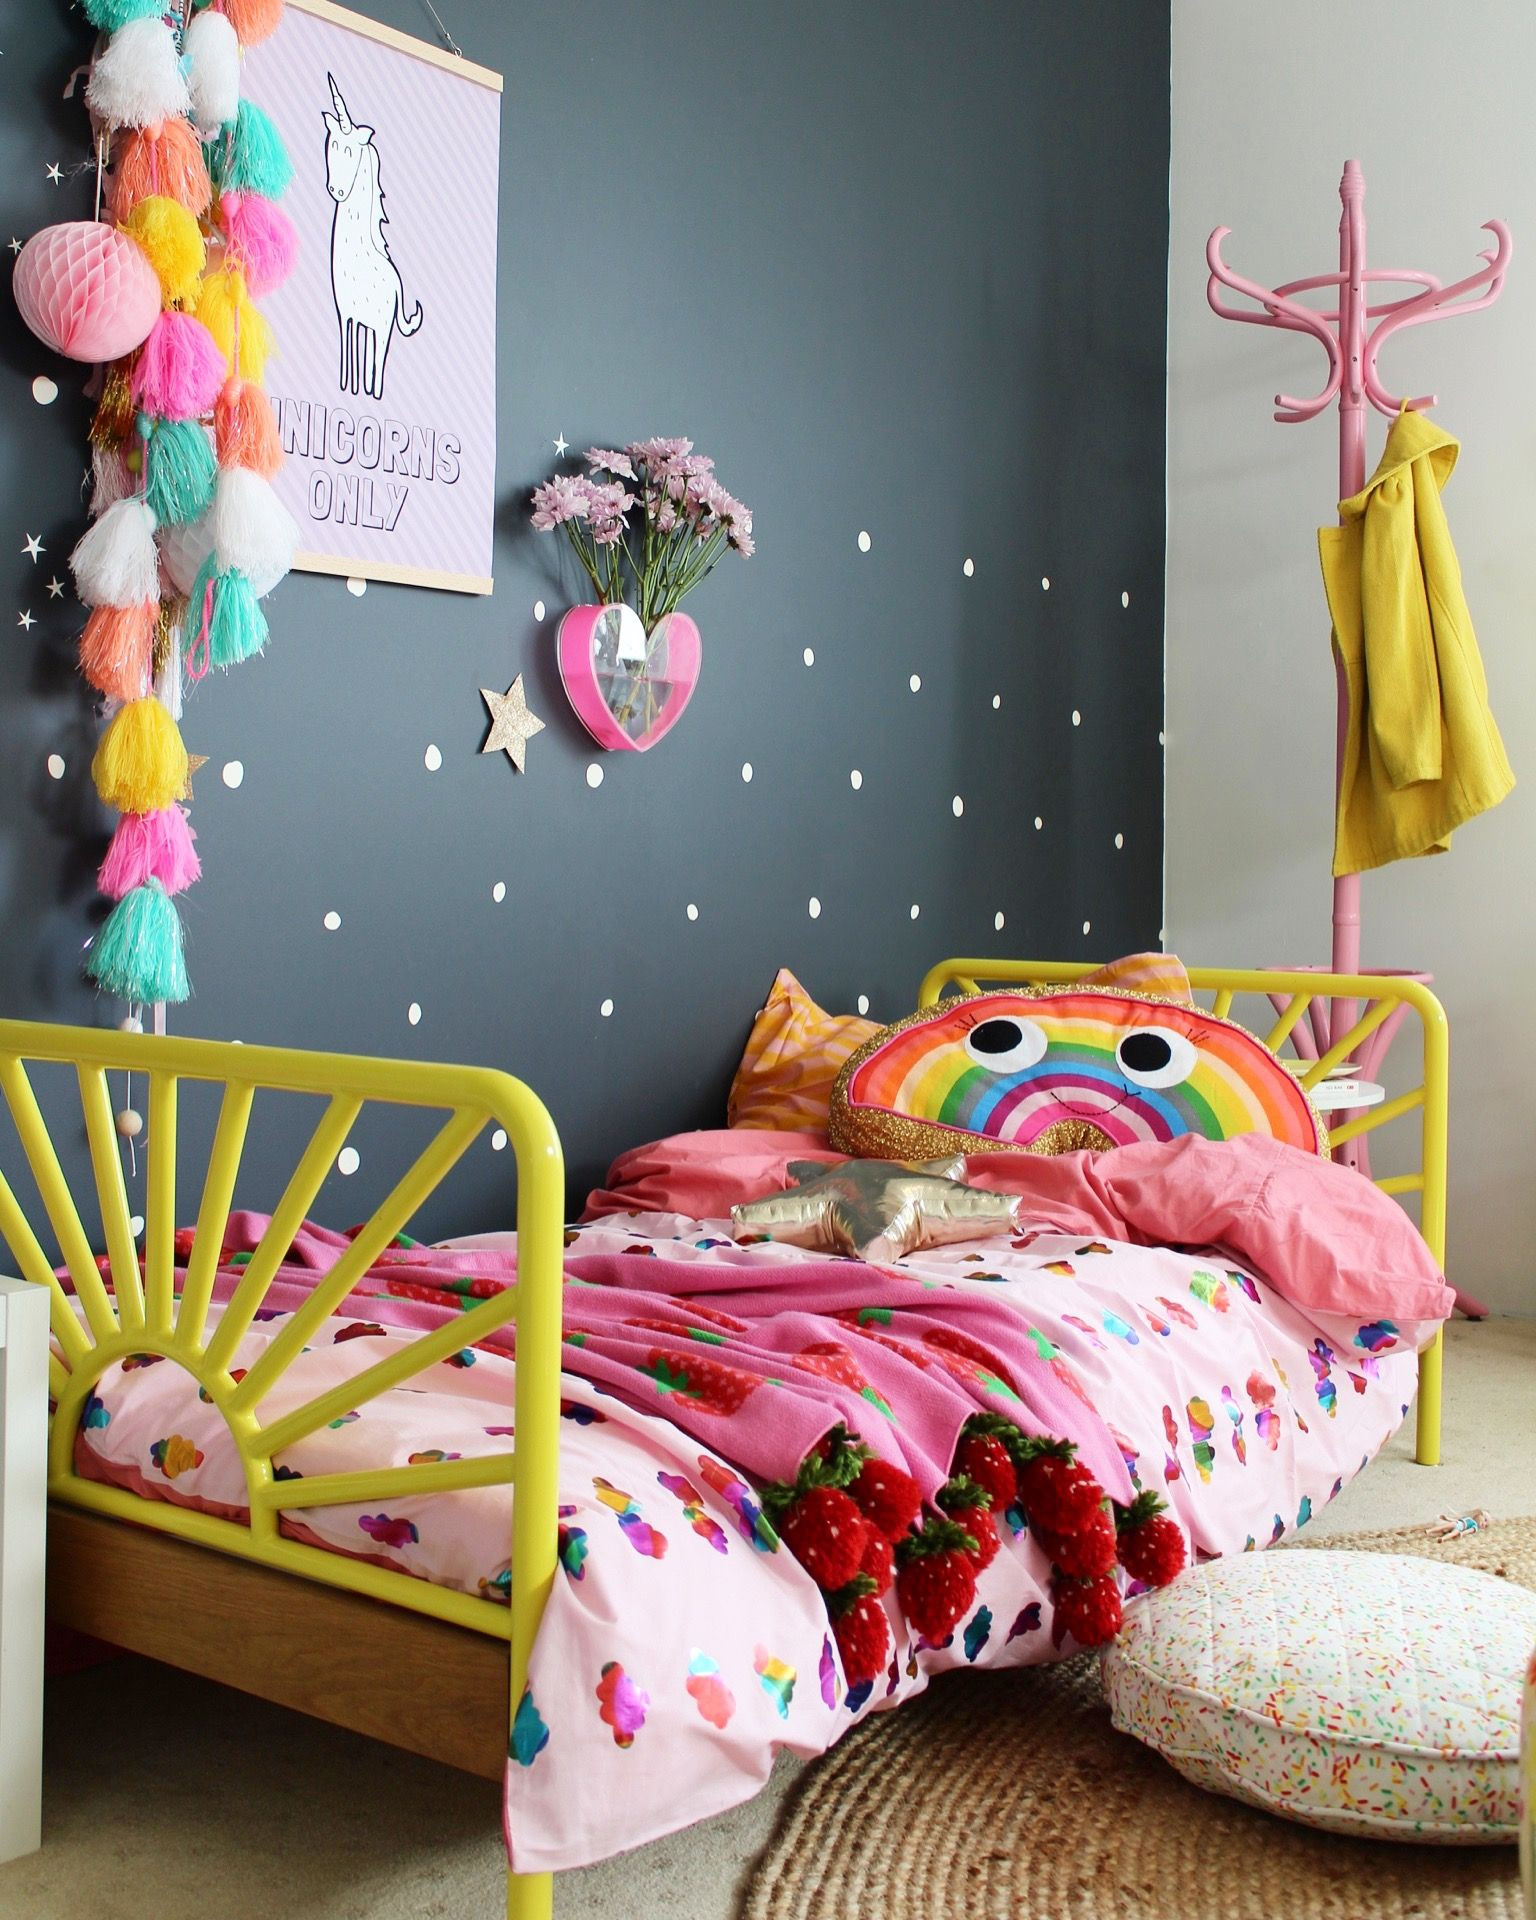 DIY Room Decorations For Kids
 25 Amazing Girls Room Decor Ideas for Teenagers